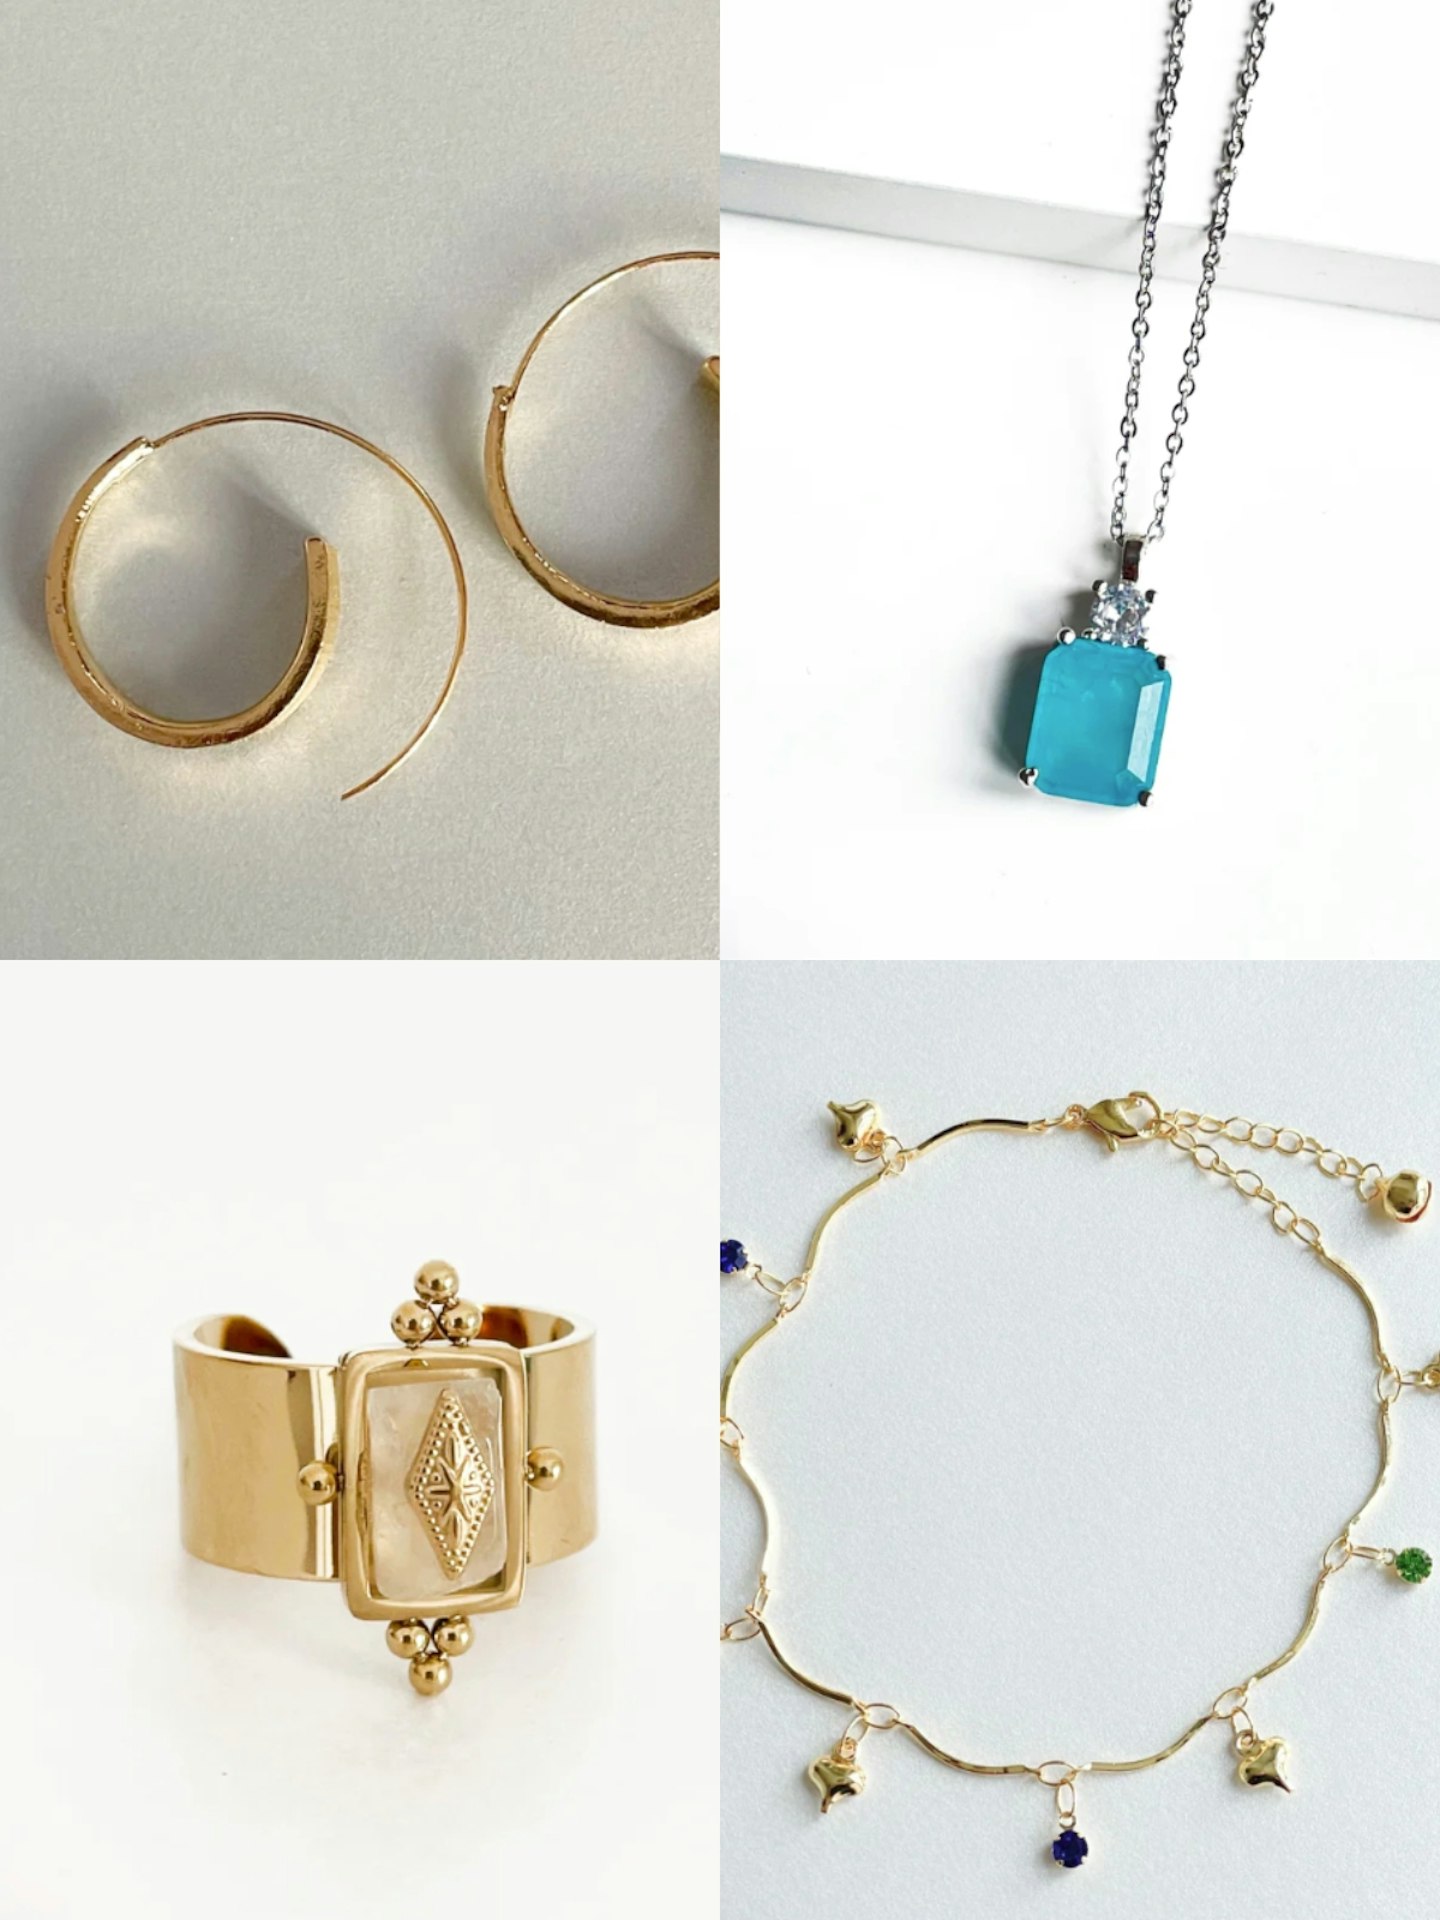 Treat yourself to trending jewellery pieces from Lovisa! Discover